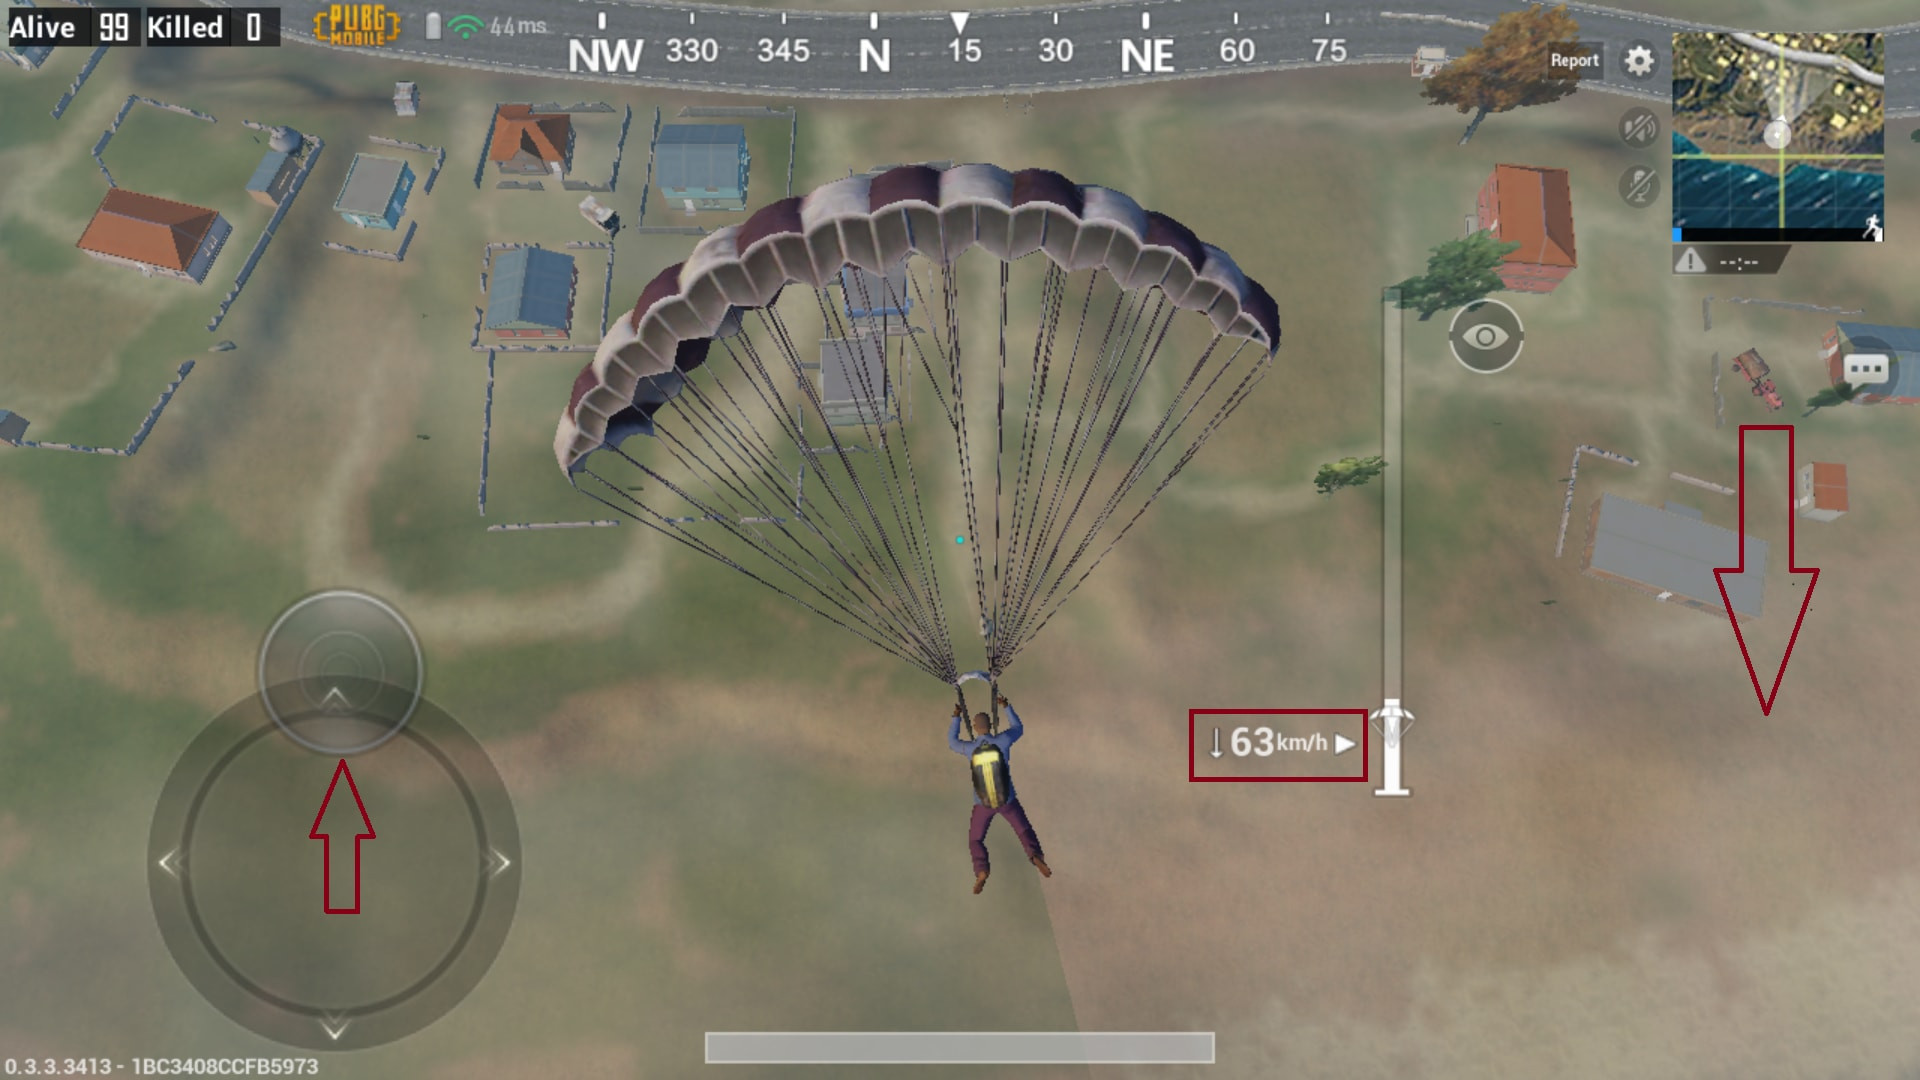 Drop down faster after releasing parachute